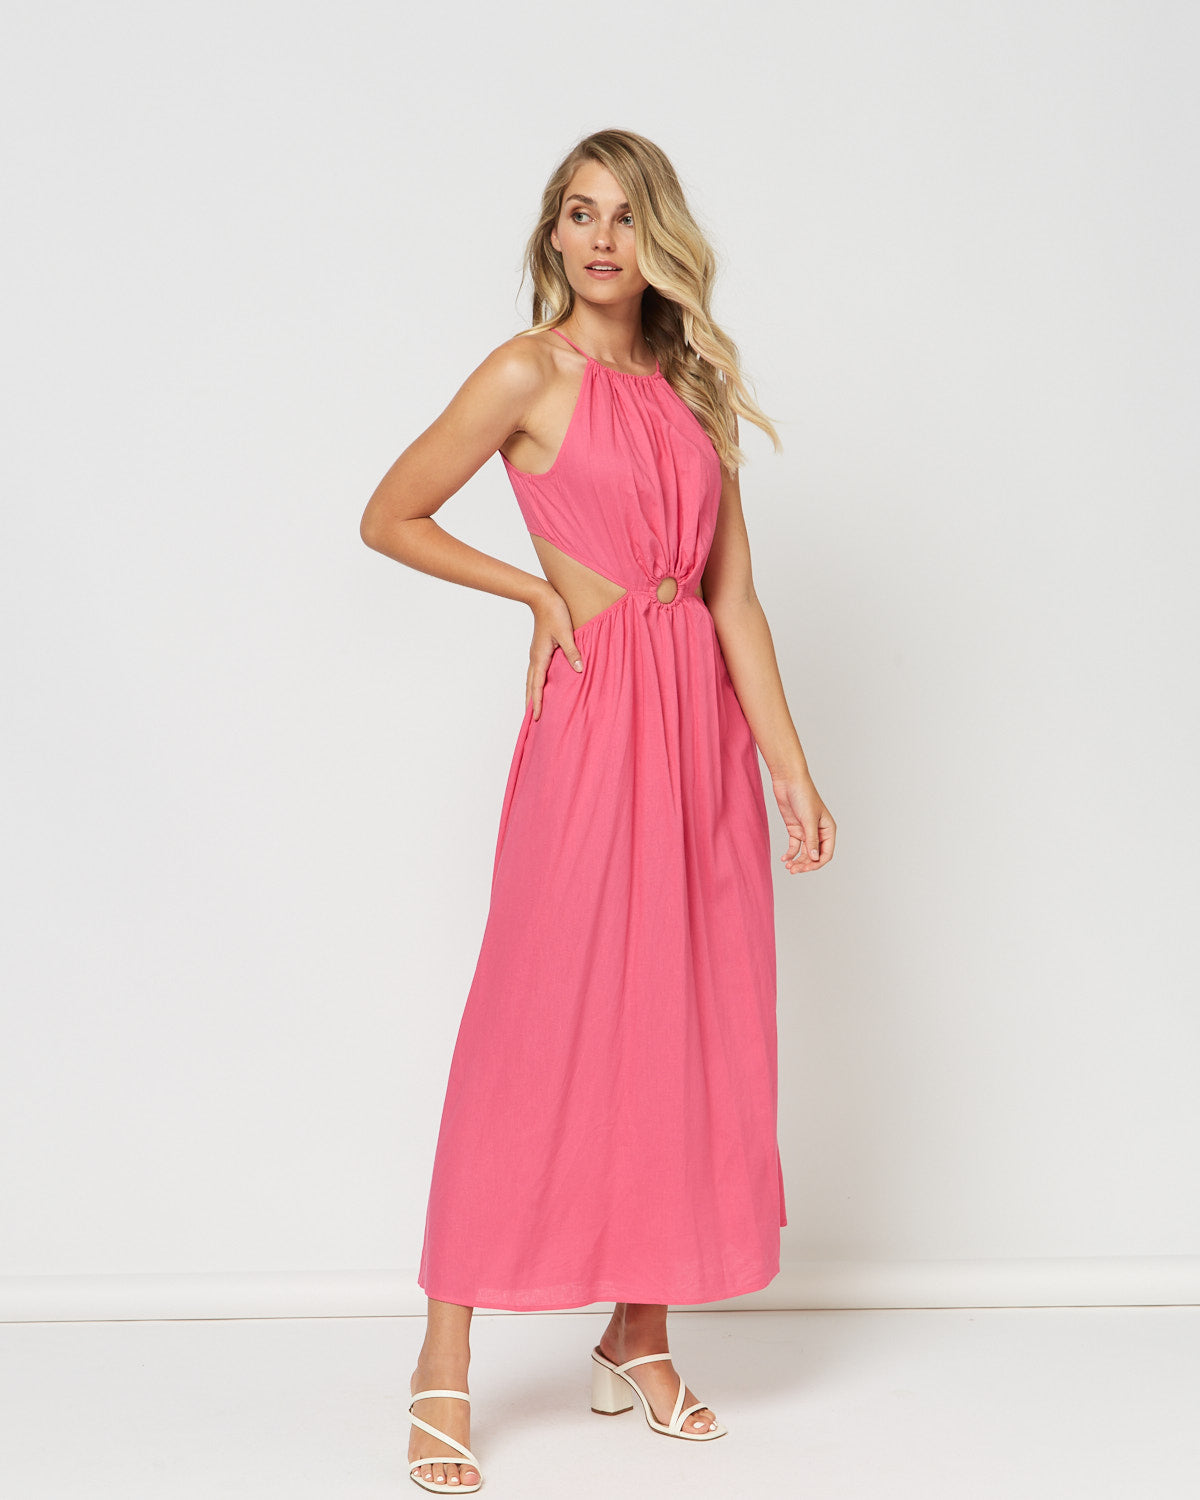 Woman wearing the candice pink high neck dress with cut out